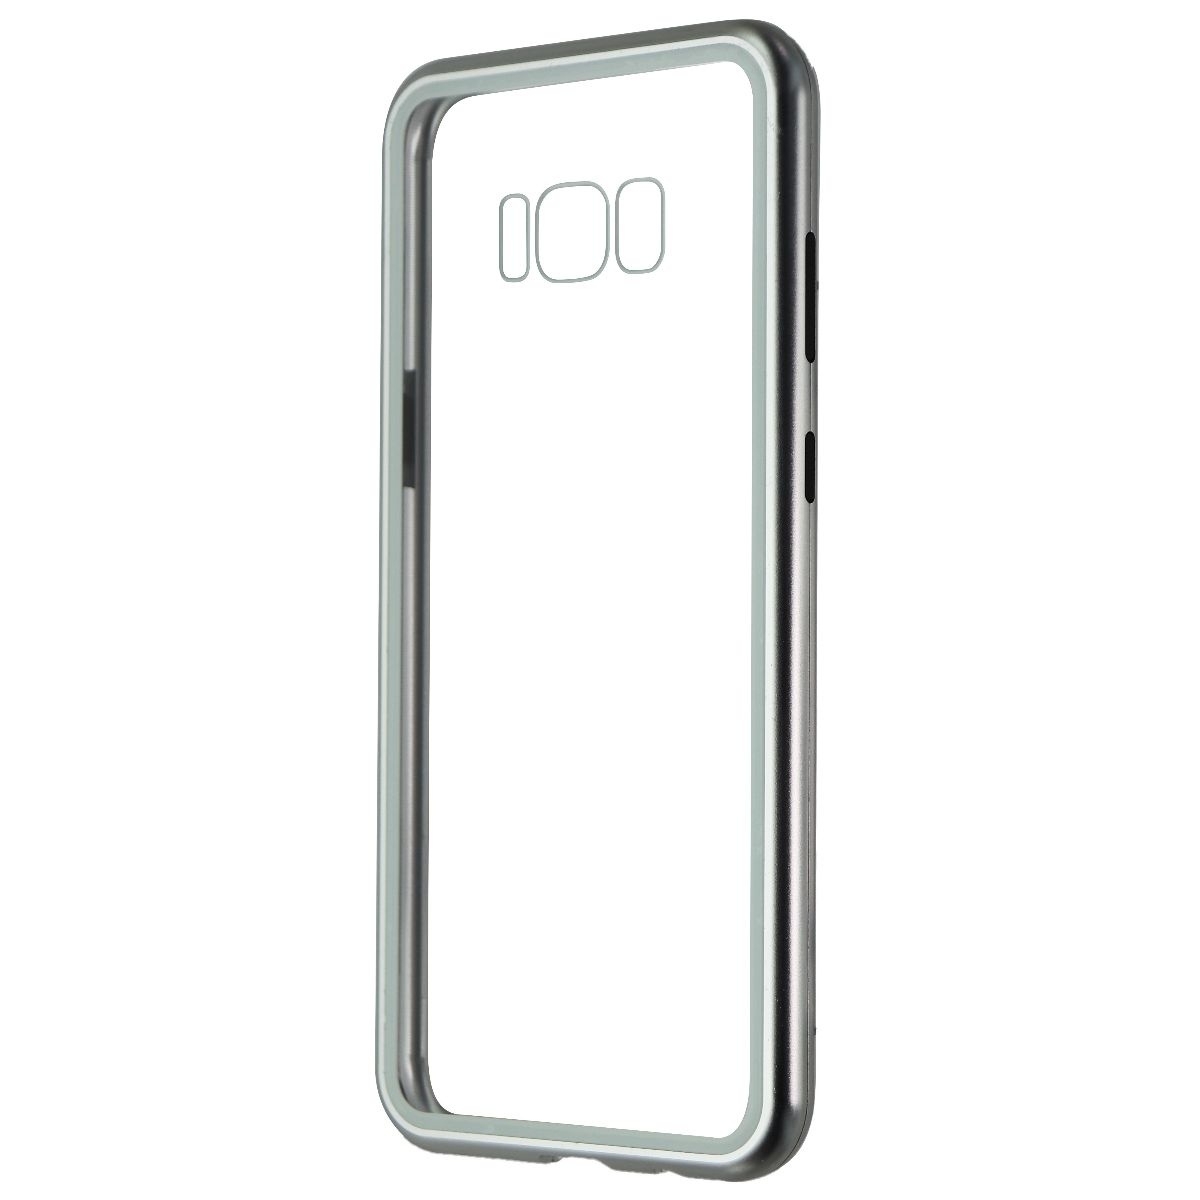 Zore Hybrid Glass Series Case For Samsung Galaxy S8 Plus - Clear/Silver